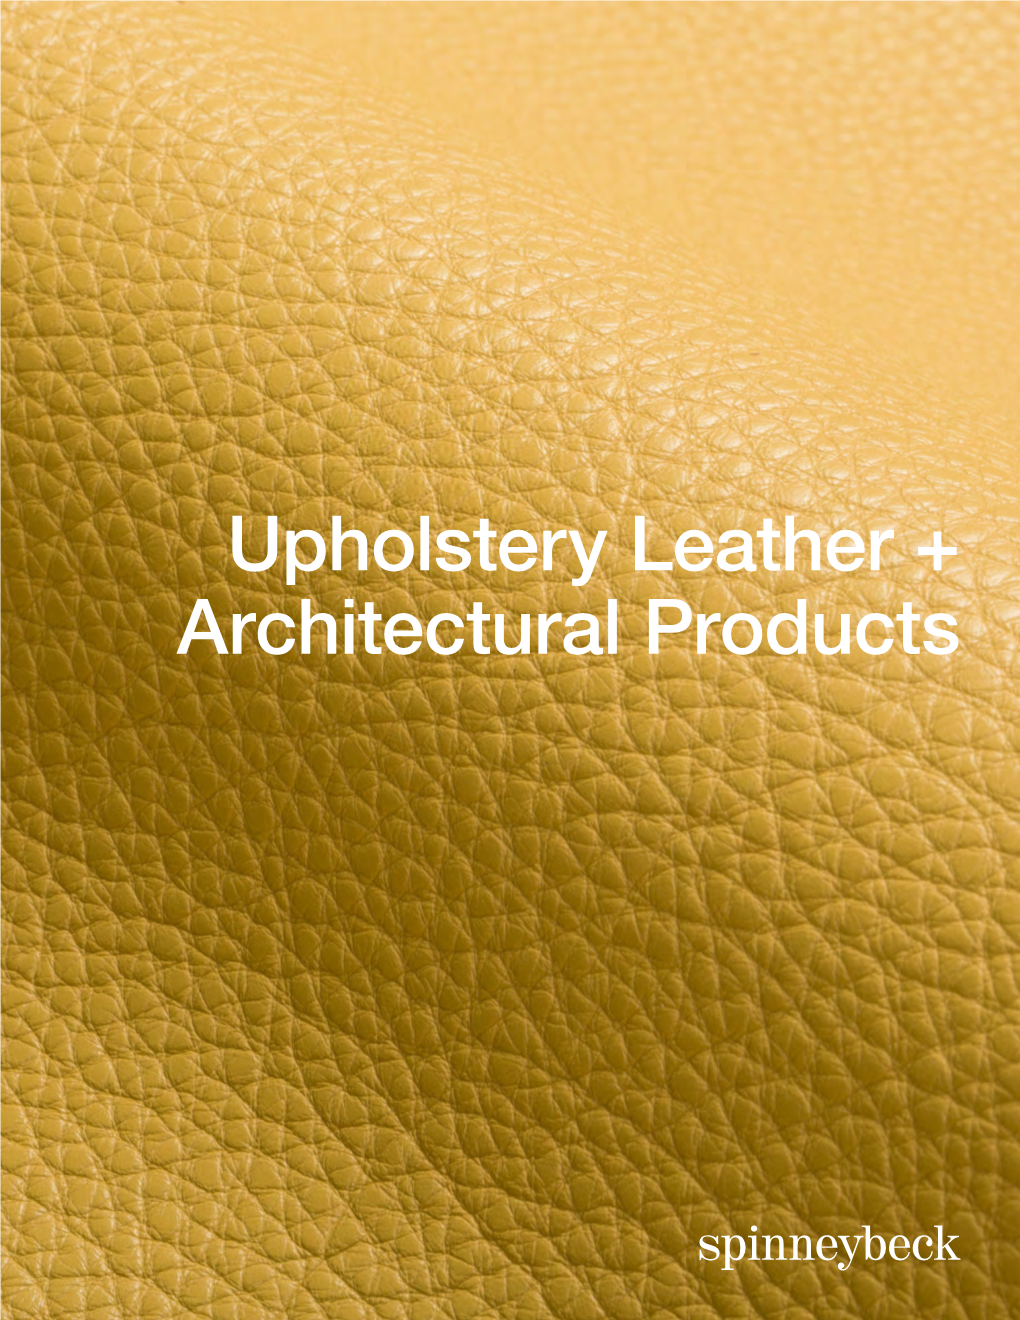 Upholstery Leather + Architectural Products